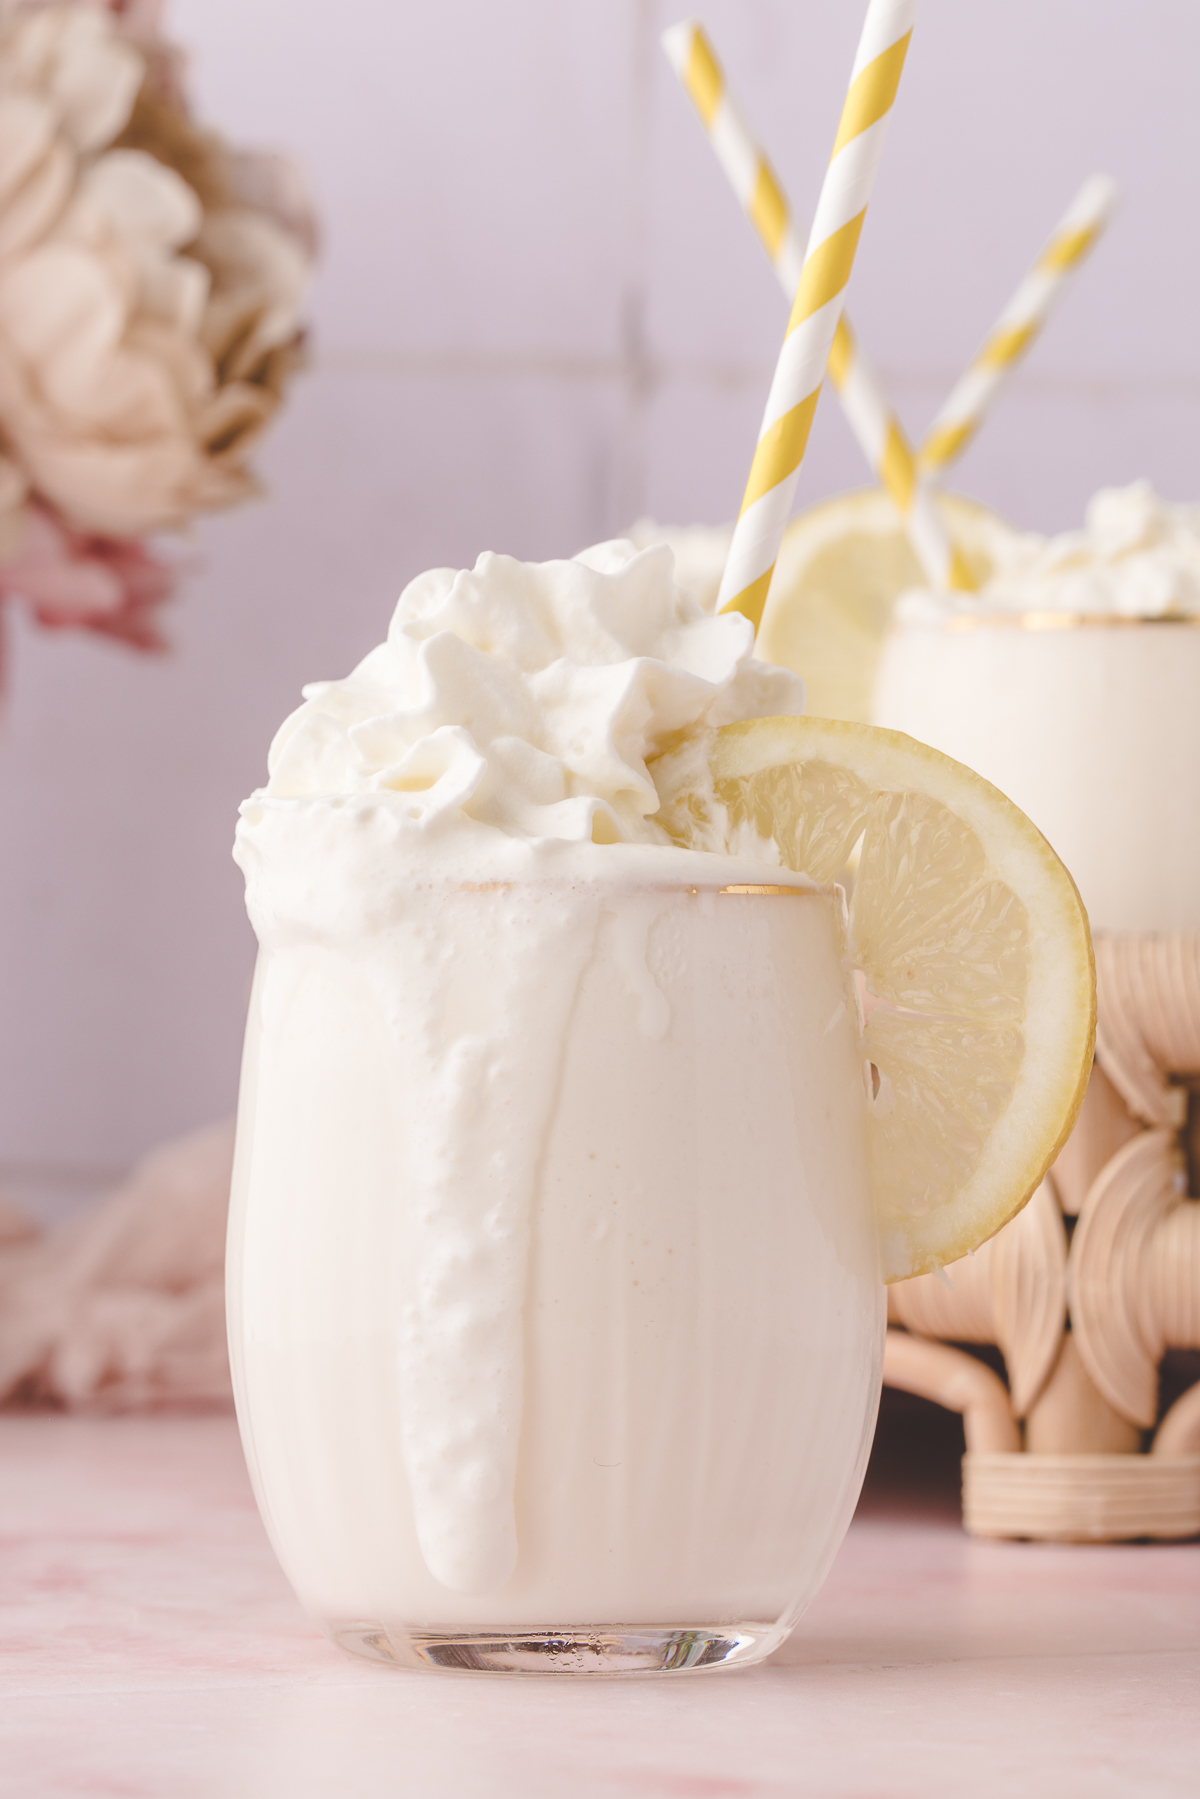 This TikTok Famous Whipped Lemonade recipe is the cool, creamy, blended, indulgent treat you need this summer!